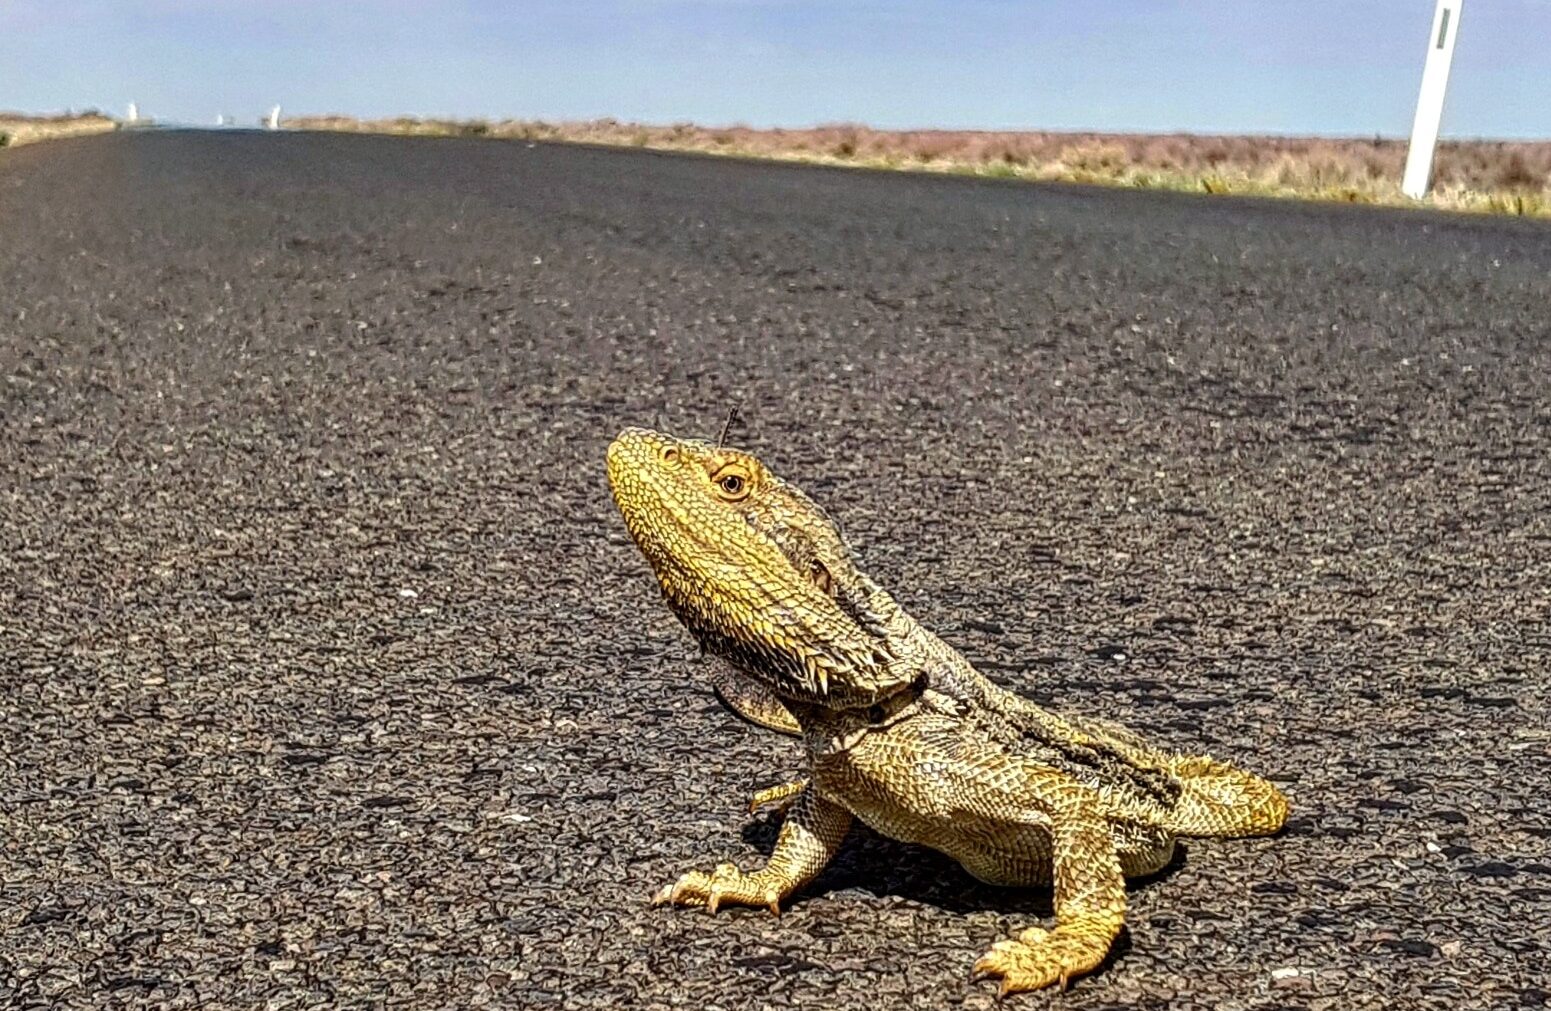 Australian Water Dragon on the road in Kalyarr National Park, Hay, Lachlan River Visitor Area. Photo credit: Samantha Ellis / DCCEEW